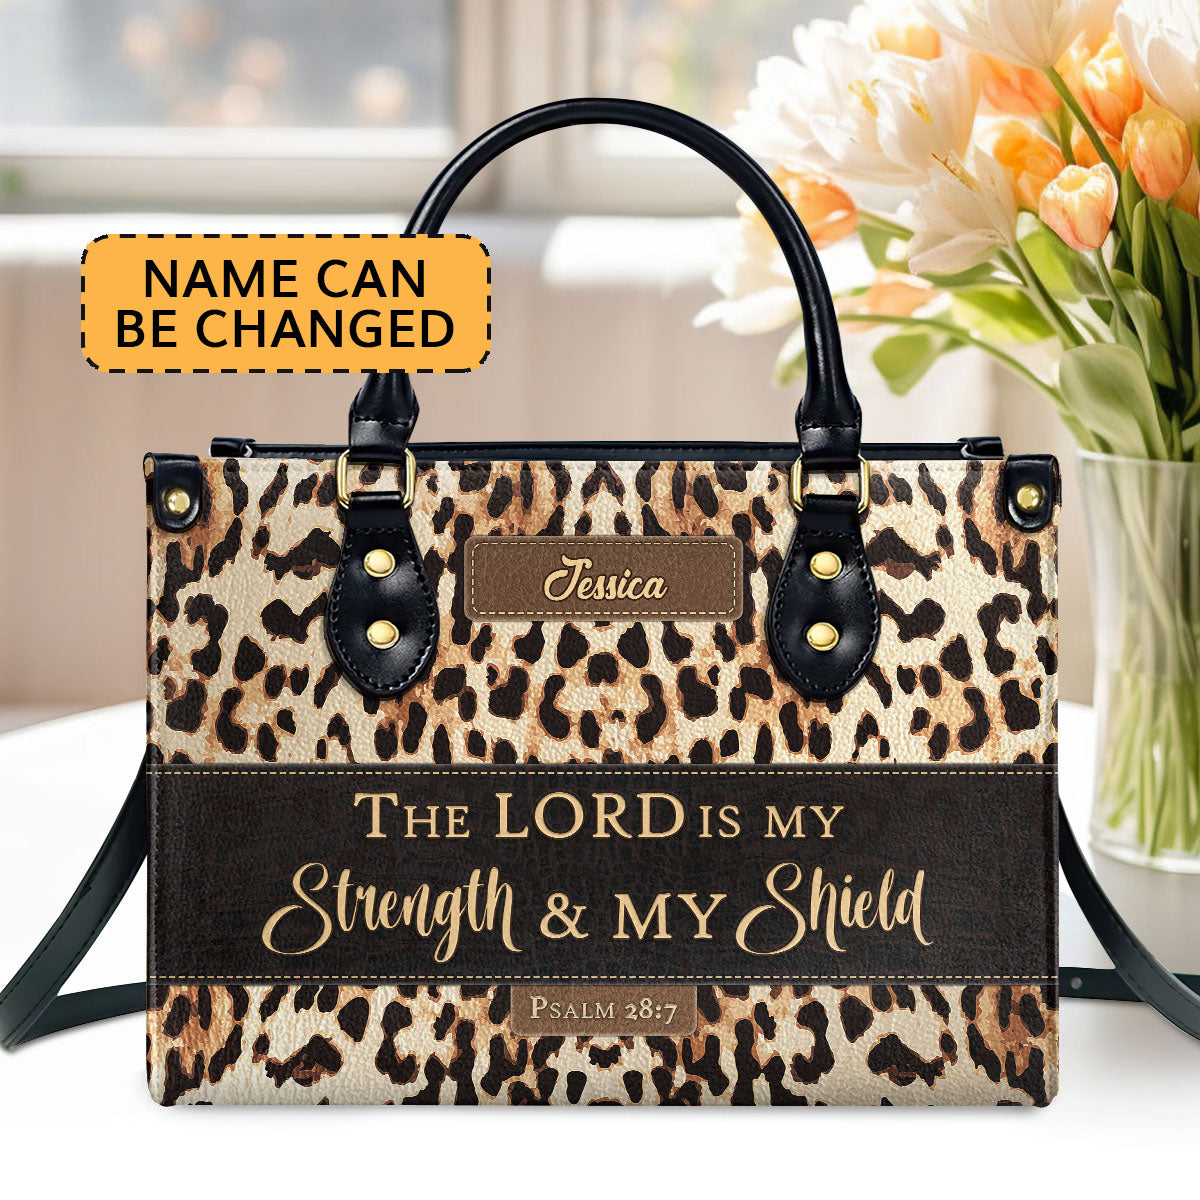 Psalm 287 The Lord Is My Strength And My Shield Personalized Leather Handbag With Zipper Worship Gift For Women's Ministry